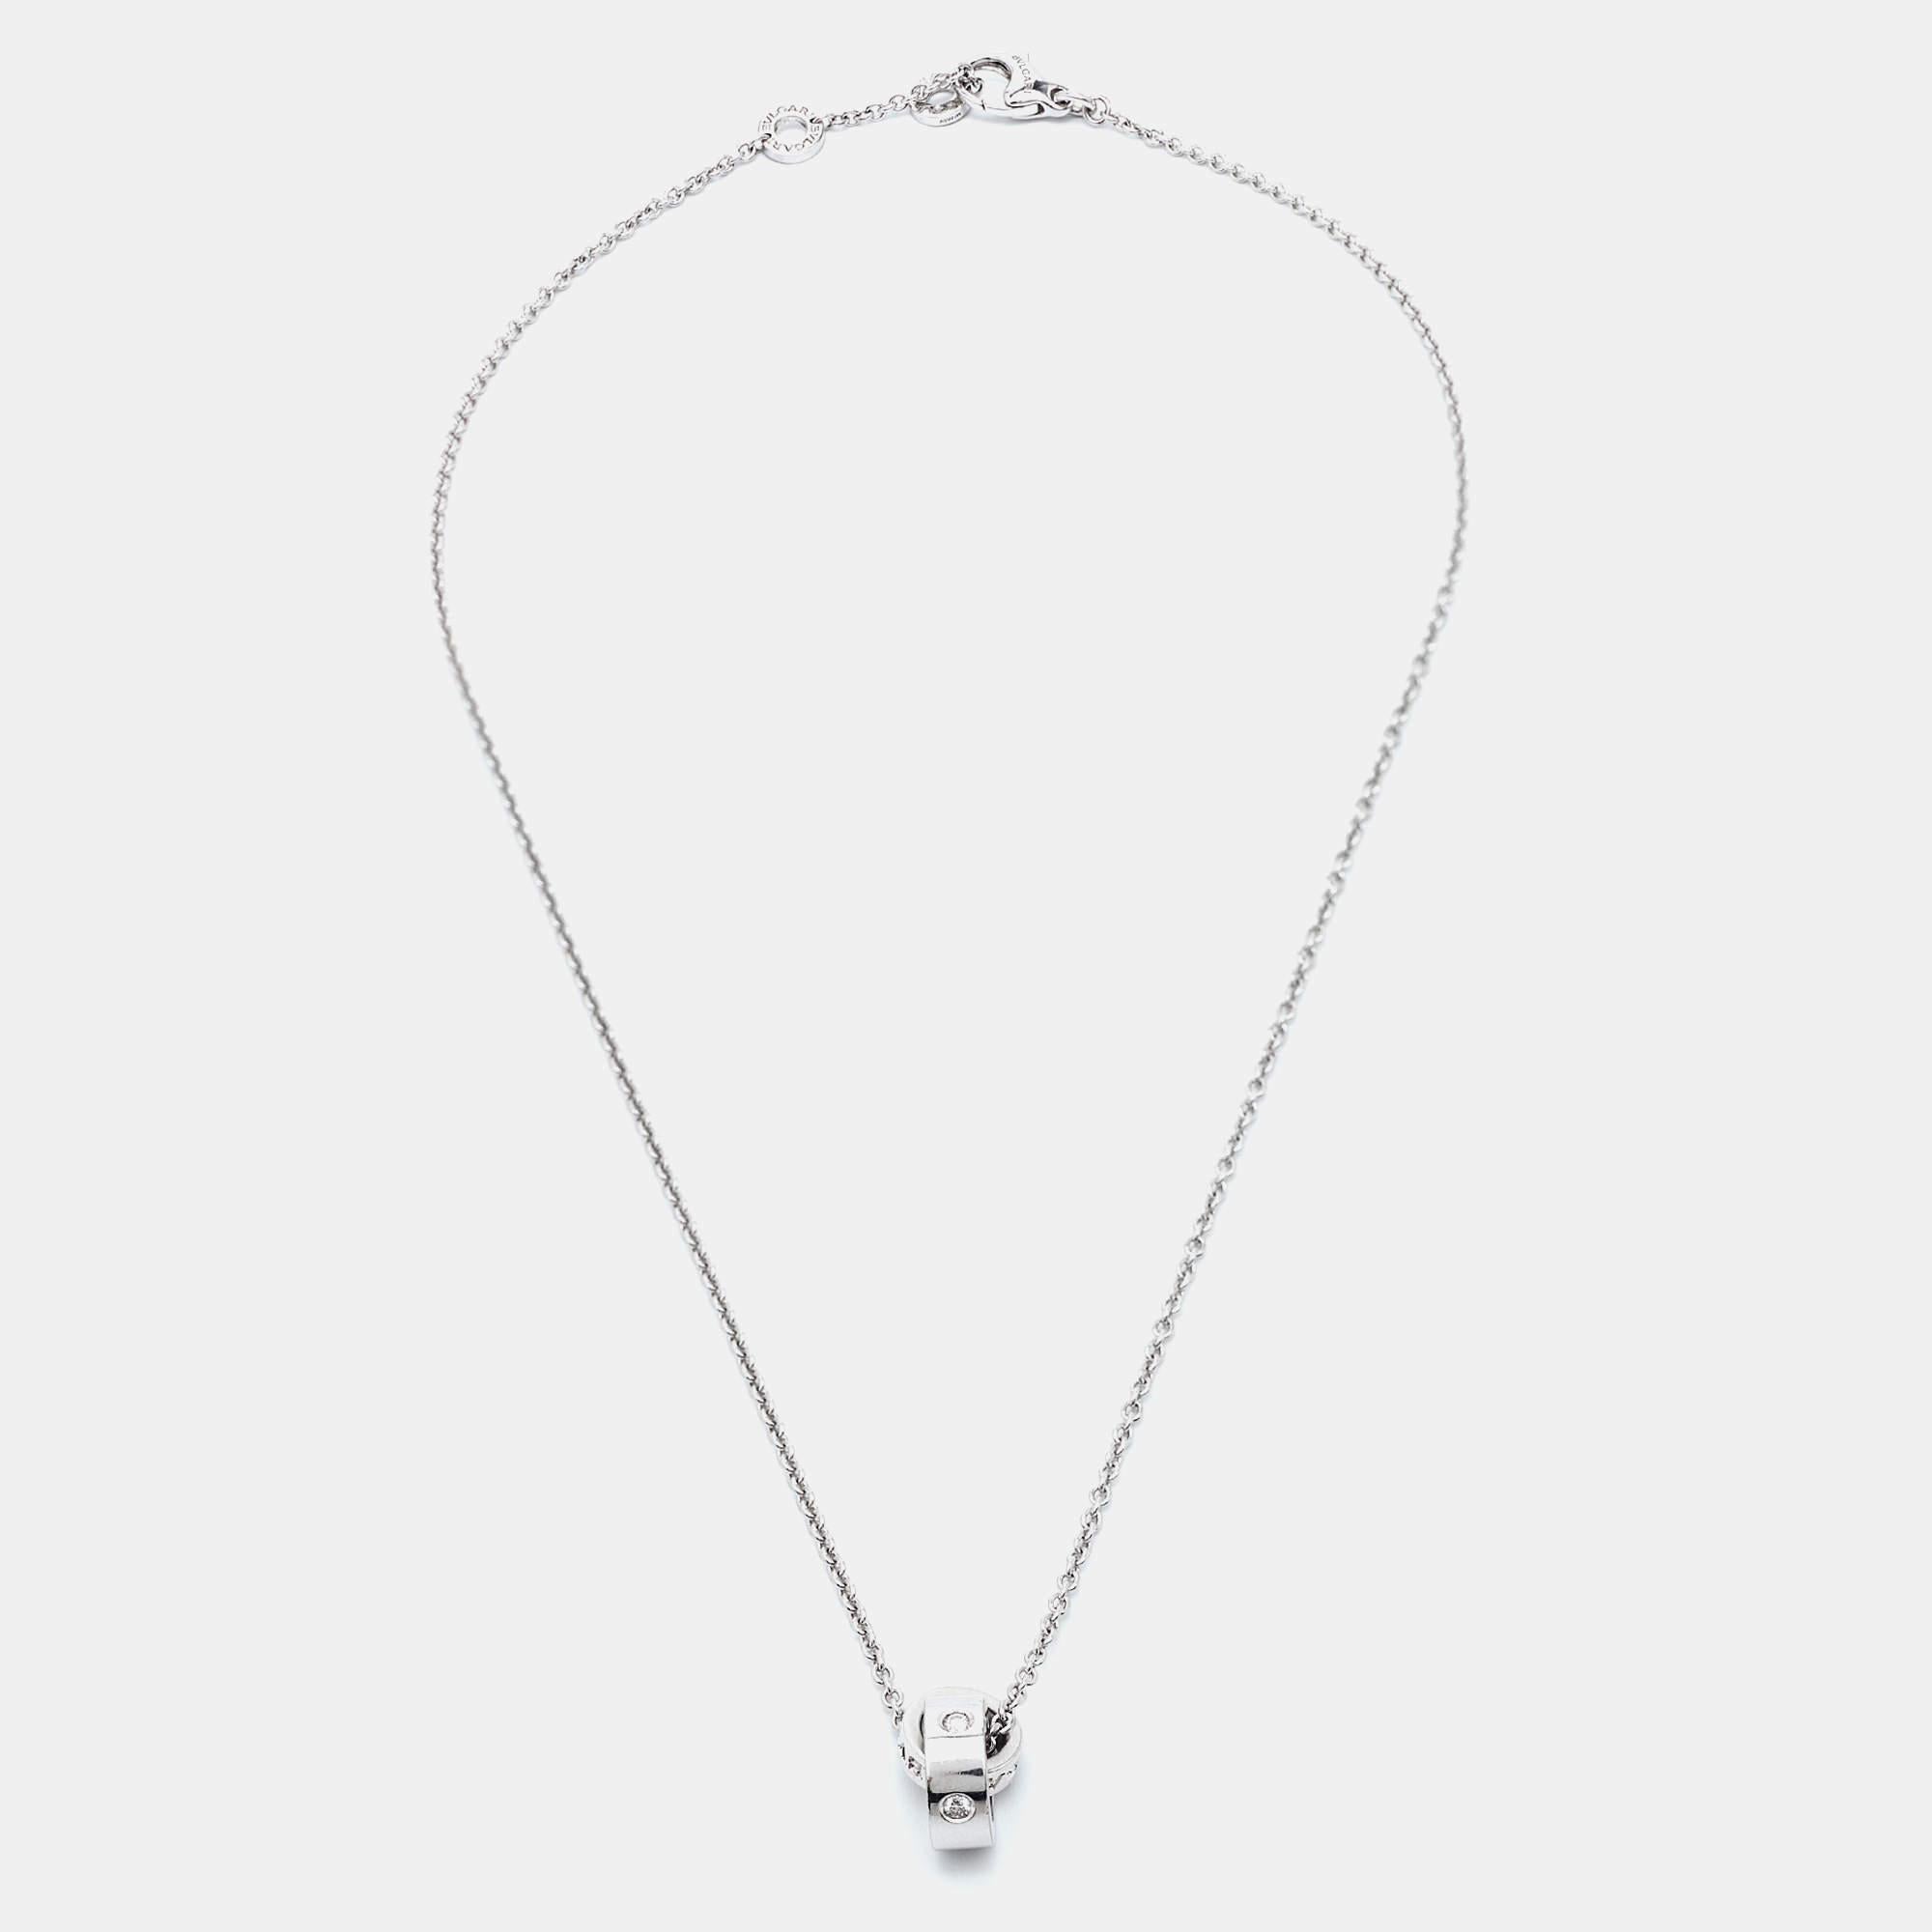 Crafted in luxurious 18K white gold, the Bvlgari Bvlgari necklace exudes timeless elegance. A brilliant diamond, nestled within the iconic double-logo pendant, sparkles with unmatched radiance. Effortlessly elevating any ensemble, this exquisite